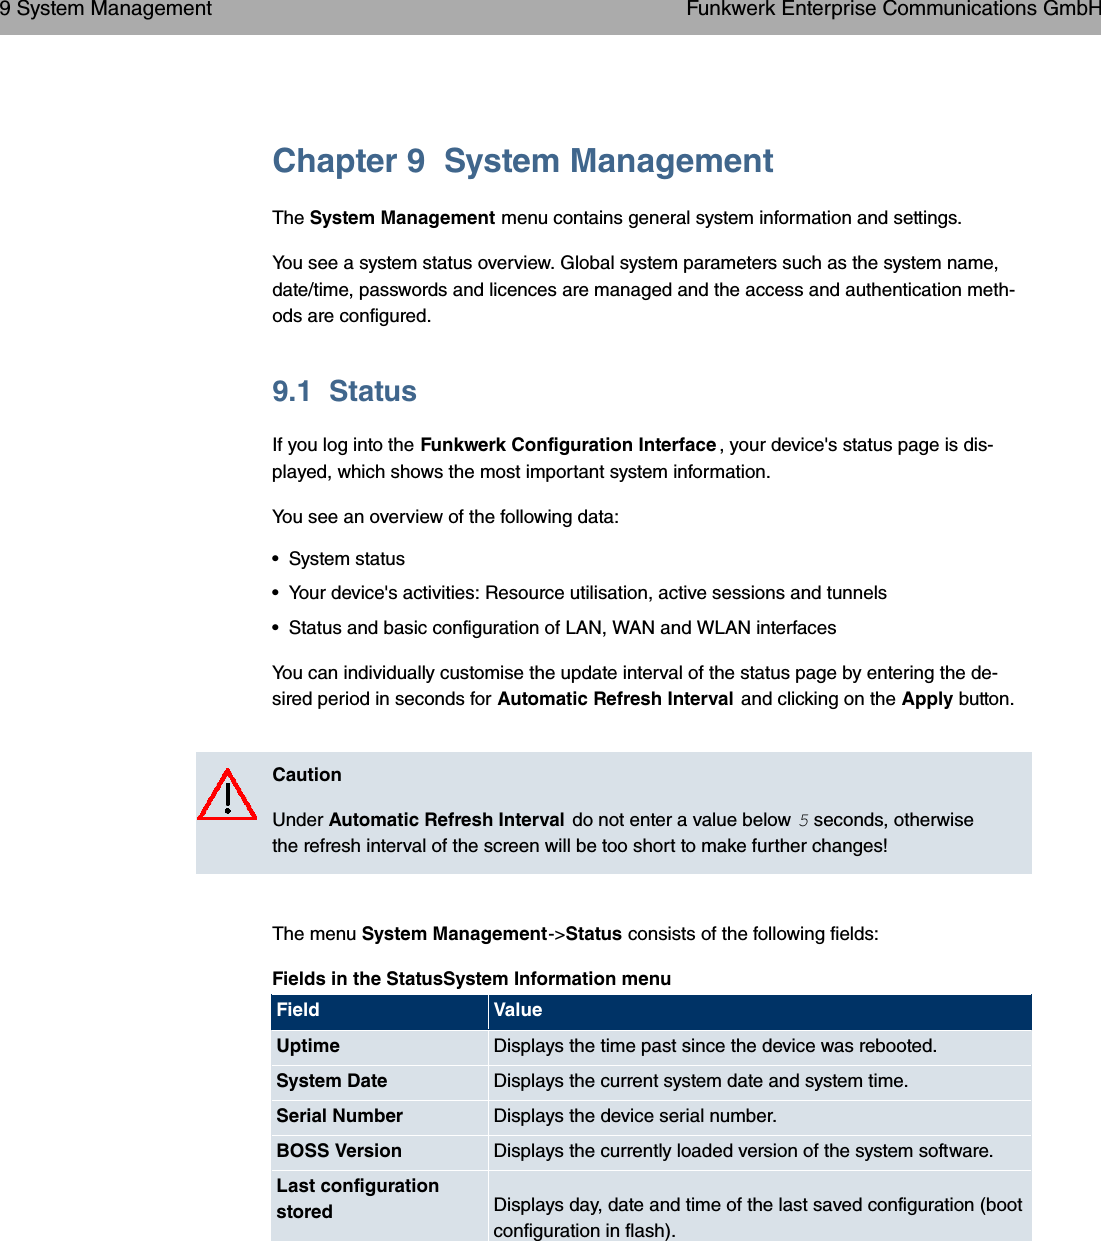 Chapter 9 System ManagementThe System Management menu contains general system information and settings.You see a system status overview. Global system parameters such as the system name,date/time, passwords and licences are managed and the access and authentication meth-ods are configured.9.1 StatusIf you log into the Funkwerk Configuration Interface , your device&apos;s status page is dis-played, which shows the most important system information.You see an overview of the following data:• System status• Your device&apos;s activities: Resource utilisation, active sessions and tunnels• Status and basic configuration of LAN, WAN and WLAN interfacesYou can individually customise the update interval of the status page by entering the de-sired period in seconds for Automatic Refresh Interval and clicking on the Apply button.CautionUnder Automatic Refresh Interval do not enter a value below seconds, otherwisethe refresh interval of the screen will be too short to make further changes!The menu System Management-&gt;Status consists of the following fields:Fields in the StatusSystem Information menuField ValueUptime Displays the time past since the device was rebooted.System Date Displays the current system date and system time.Serial Number Displays the device serial number.BOSS Version Displays the currently loaded version of the system software.Last configurationstored Displays day, date and time of the last saved configuration (bootconfiguration in flash).9 System Management Funkwerk Enterprise Communications GmbH64 bintec WLAN and Industrial WLAN